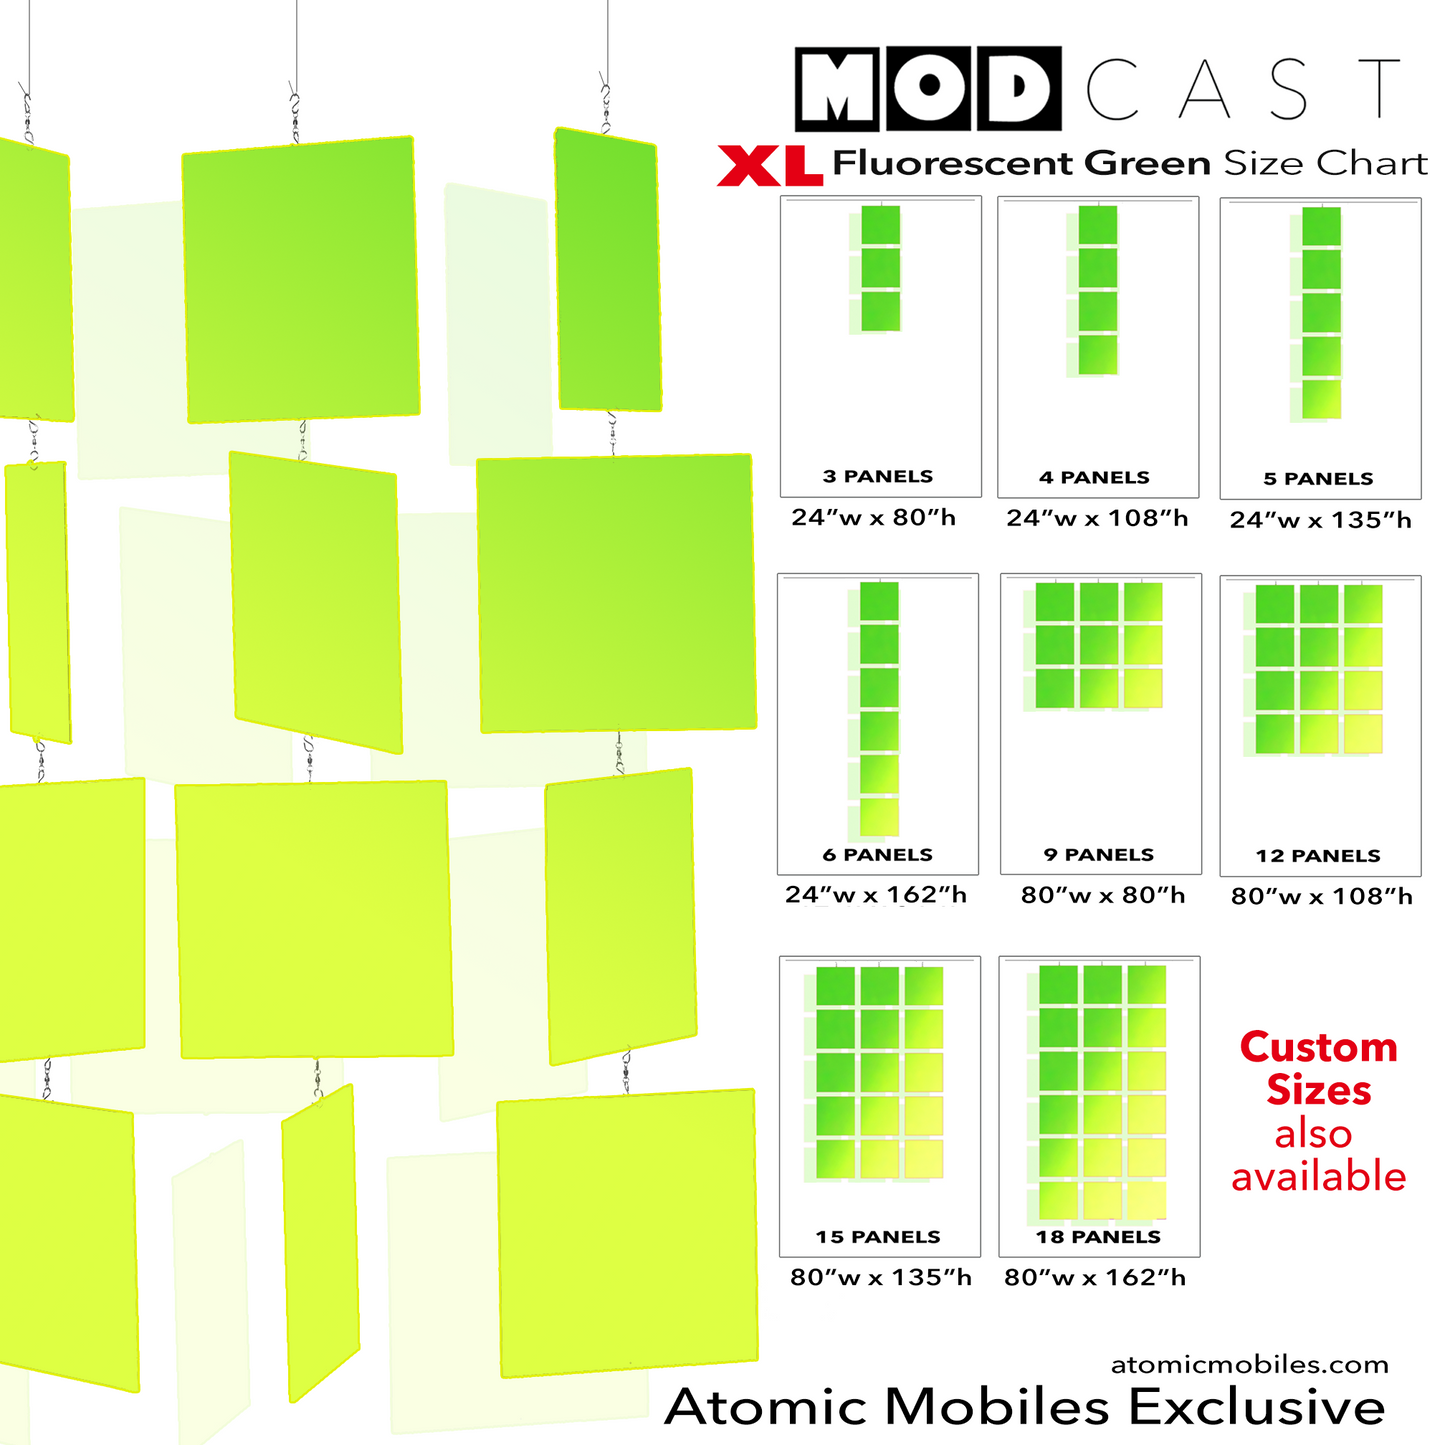 Size Chart for MODcast XXL Huge hanging art mobiles in fluorescent lime green acrylic plexiglass - made in Los Angeles by AtomicMobiles.com